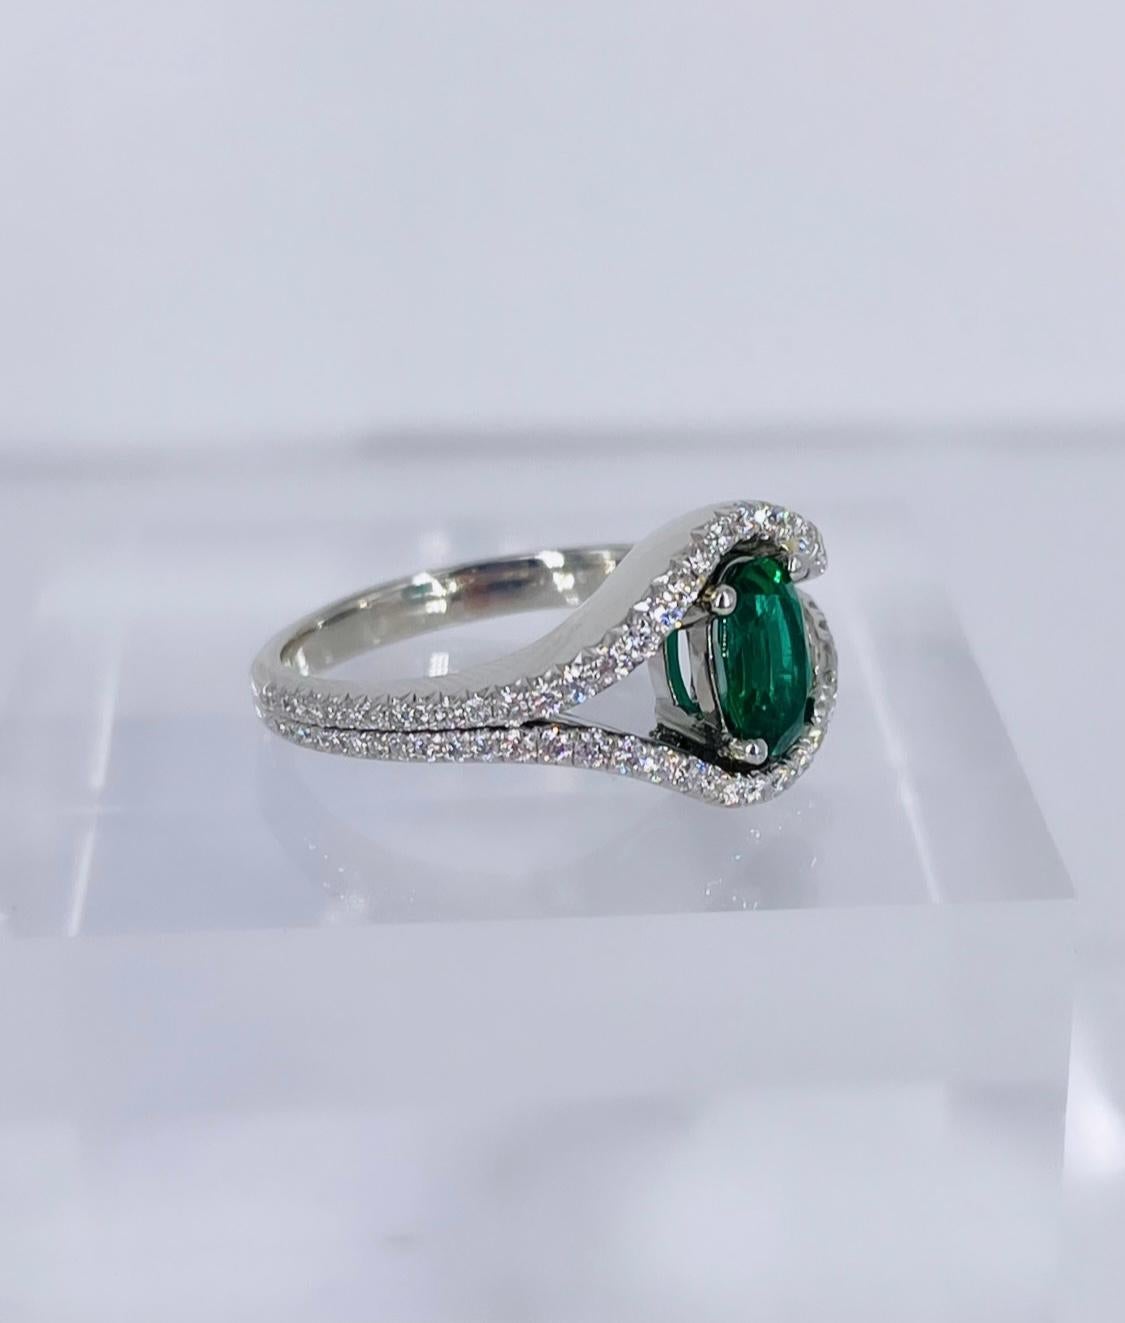 This unique diamond and emerald ring is a stunning addition to any jewelry collection! The oval emerald is a rich, very saturated green, which is a luxurious contrast against the bright white diamonds and platinum. Sleek enough for everyday wear but